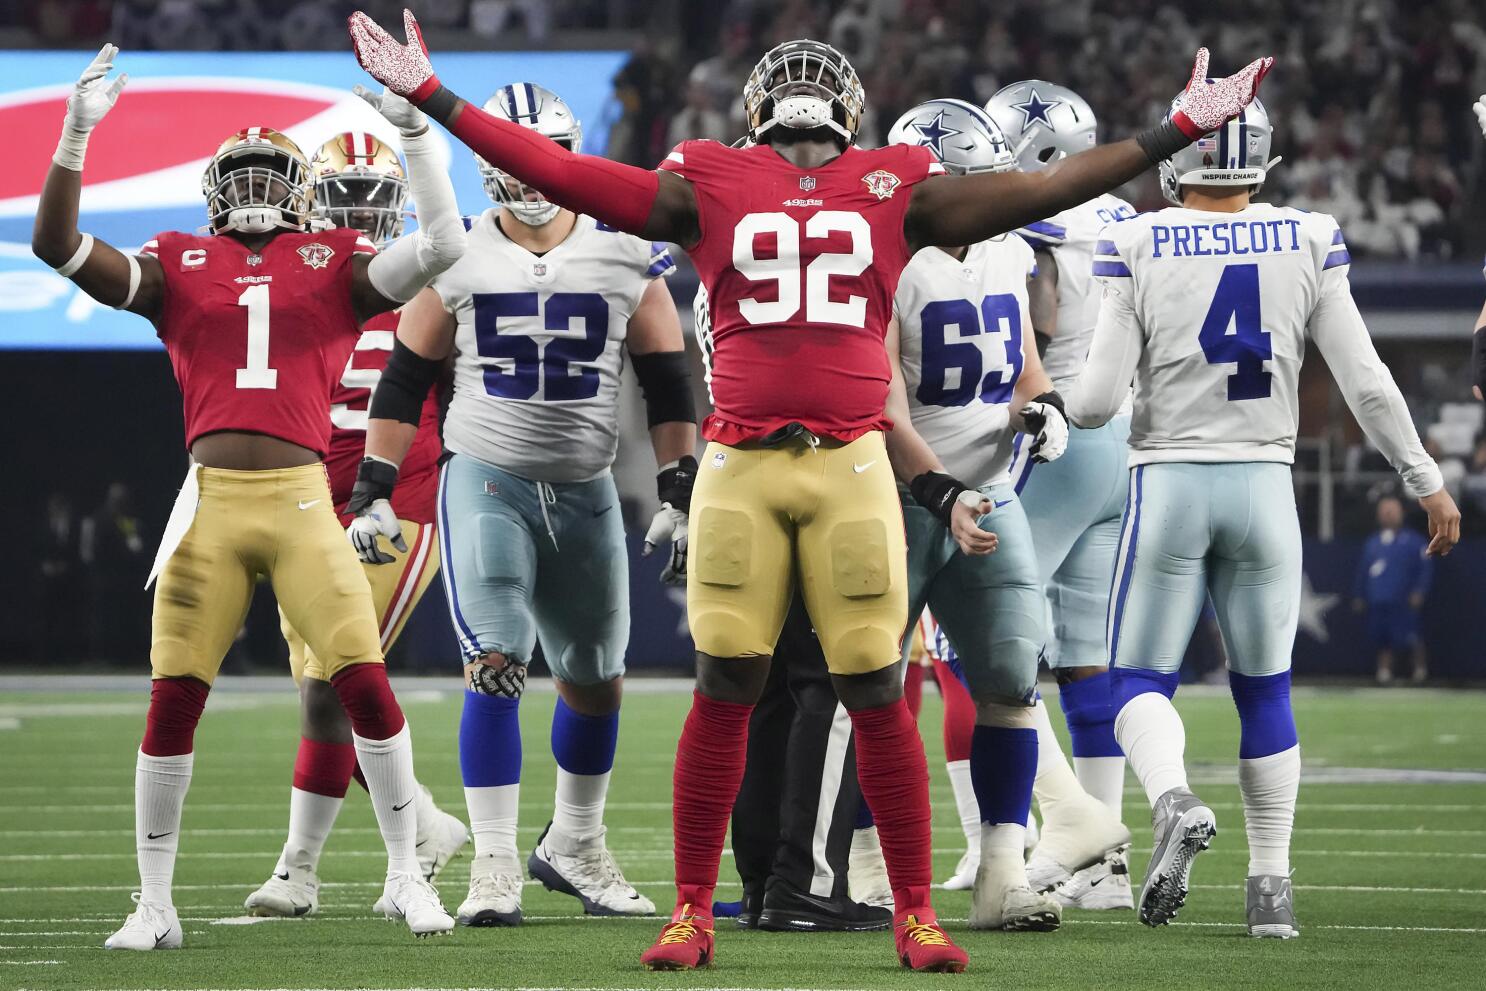 49ers survive once again to advance in playoffs to Green Bay